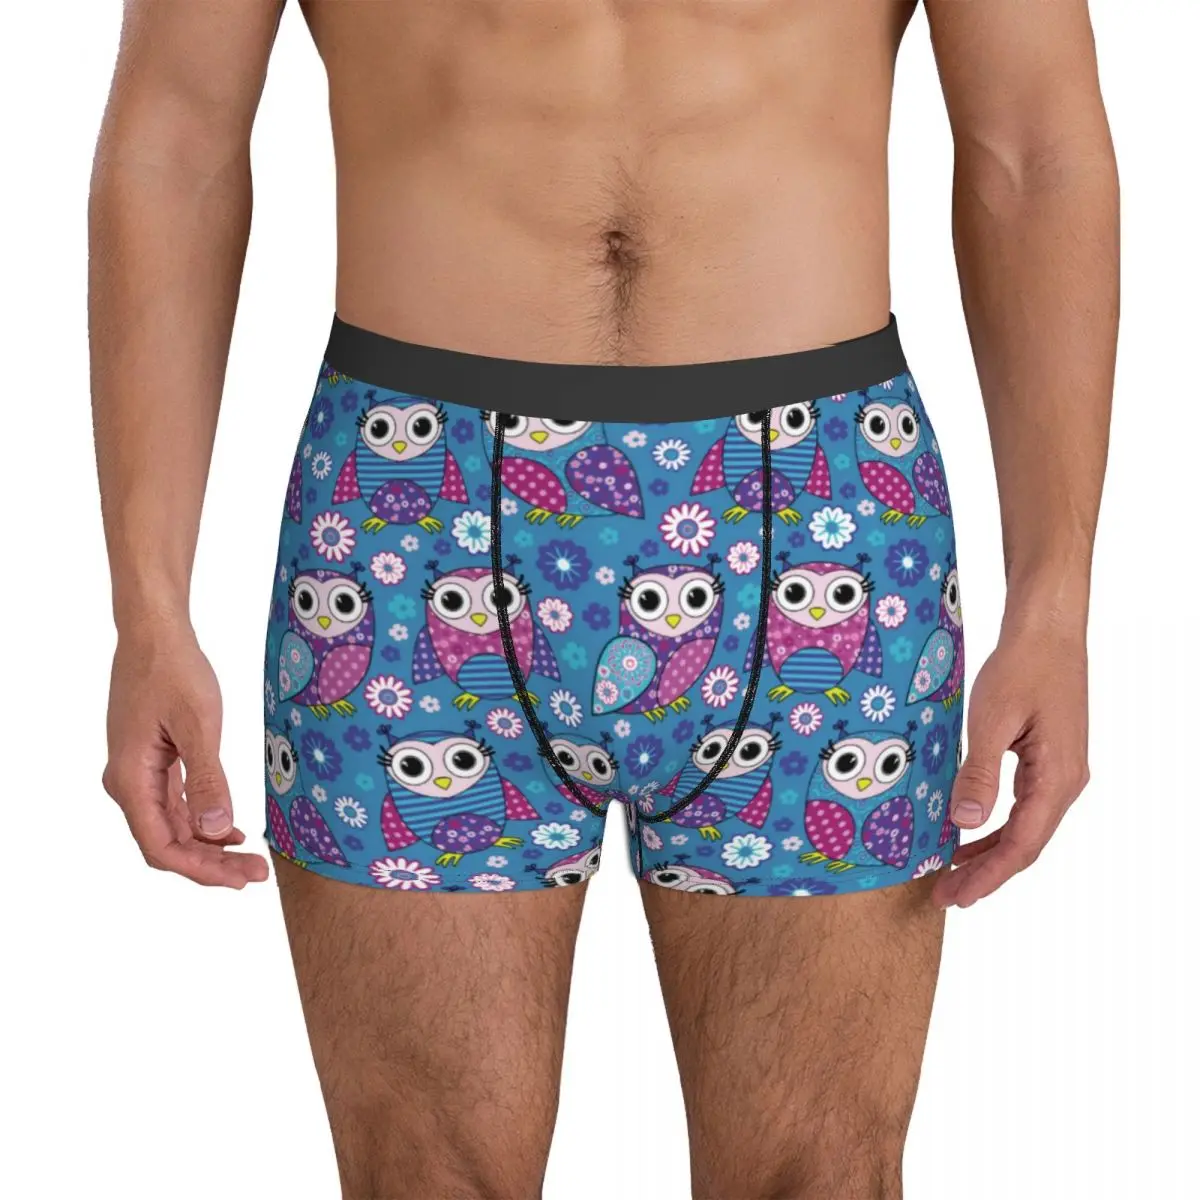 

Multicolored Owl Underwear Cute Animal Print Print Boxershorts High Quality Men Underpants Funny Boxer Brief Gift Idea